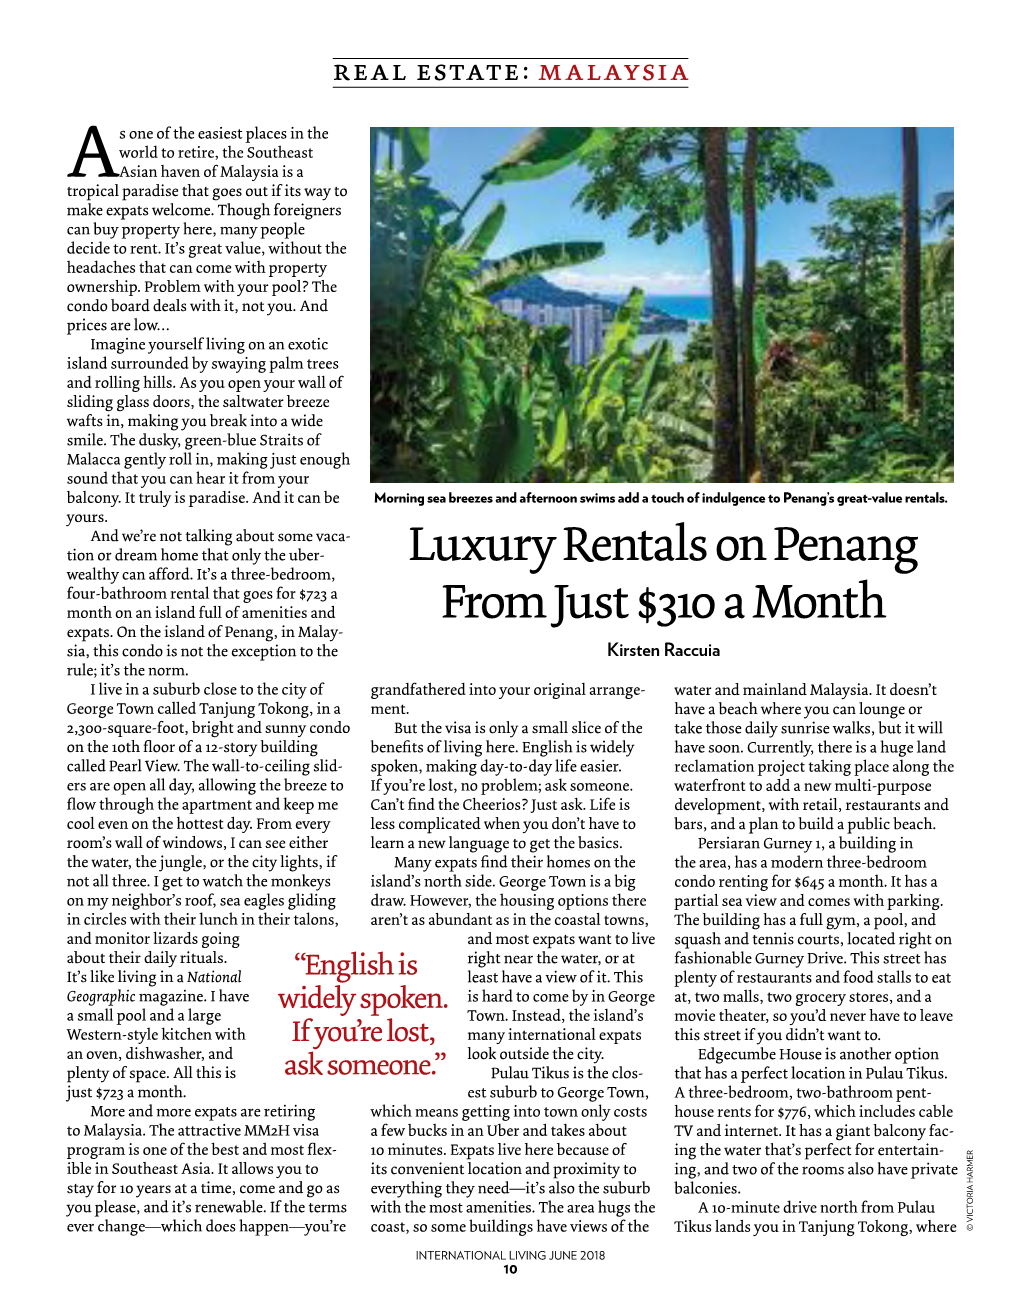 Luxury Rentals on Penang from Just $310 a Month